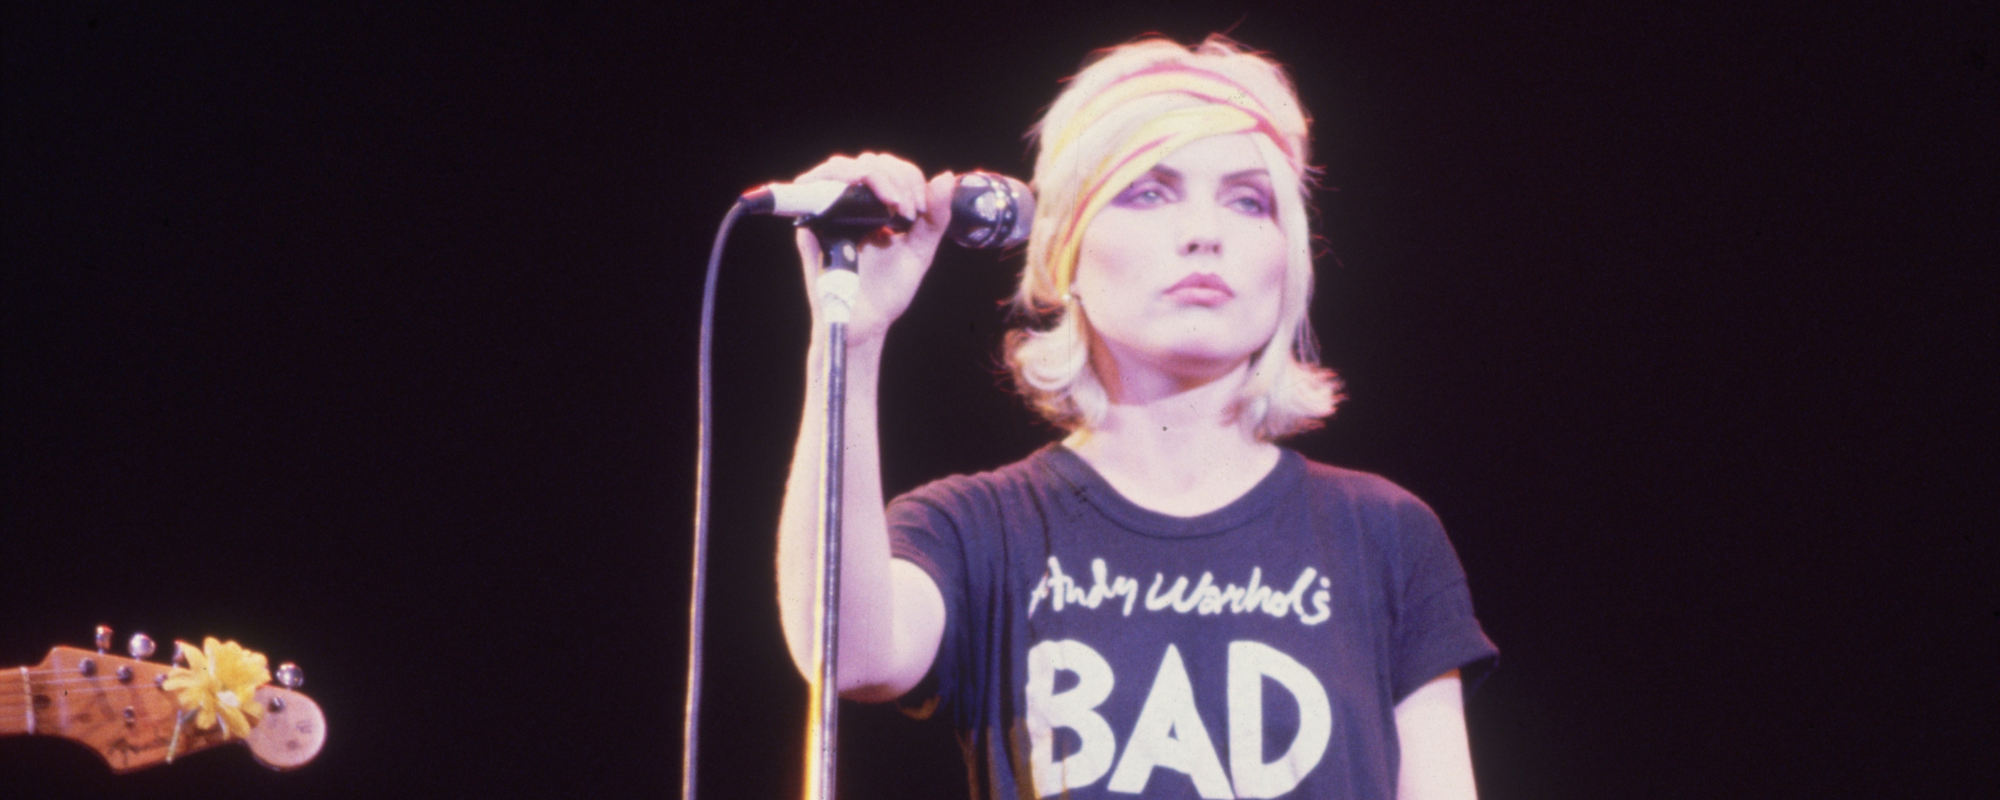 The Meaning Behind “Call Me” by Blondie